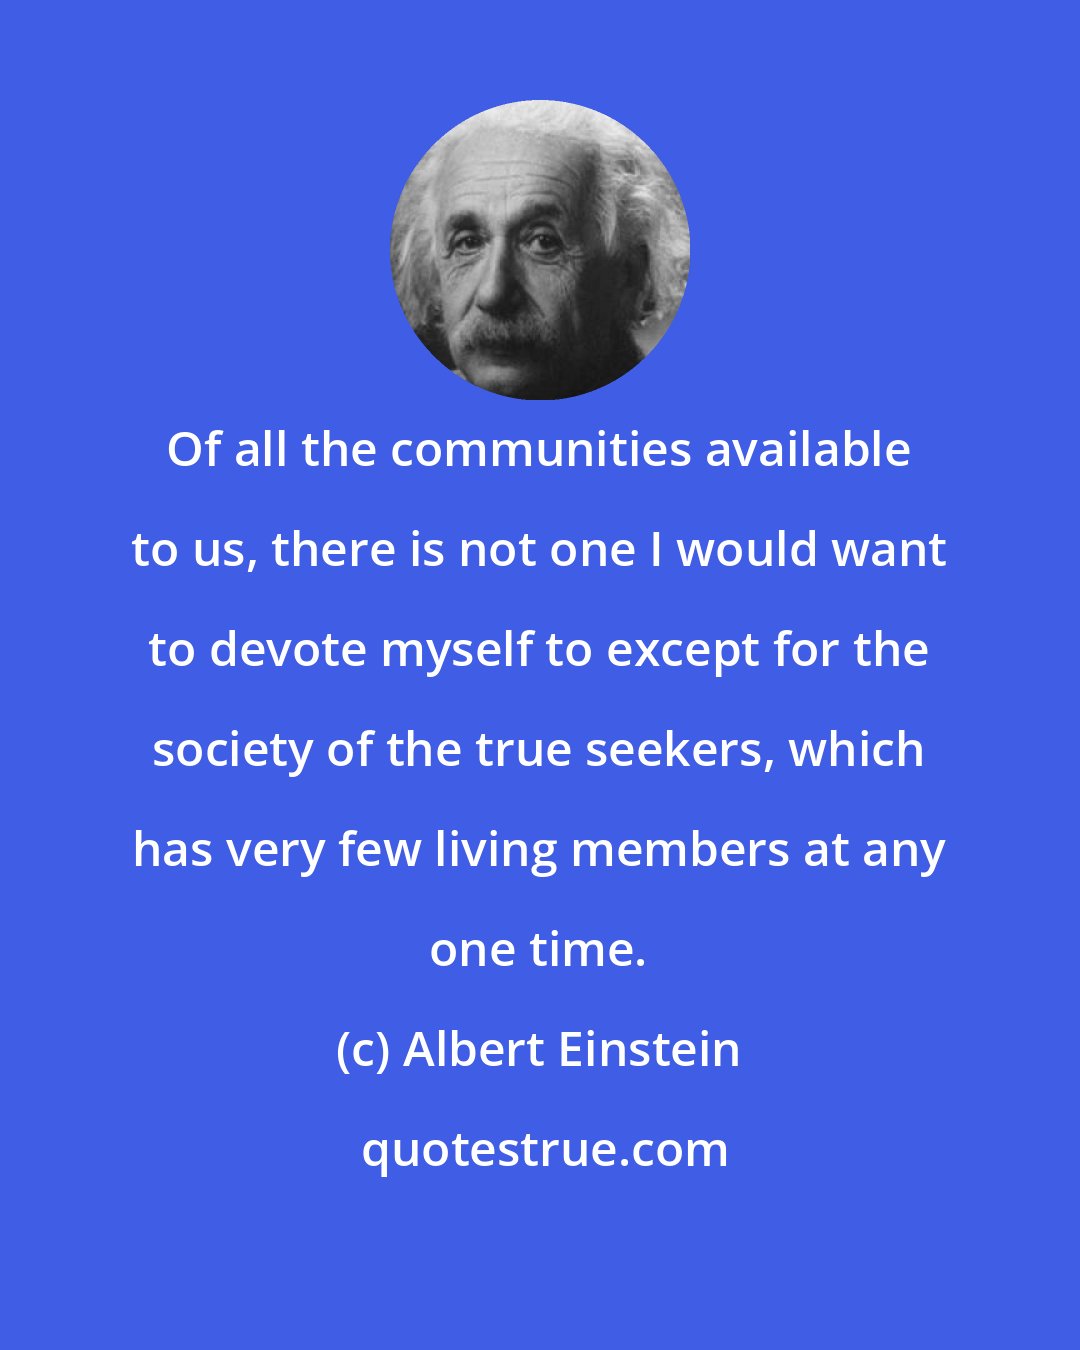 Albert Einstein: Of all the communities available to us, there is not one I would want to devote myself to except for the society of the true seekers, which has very few living members at any one time.